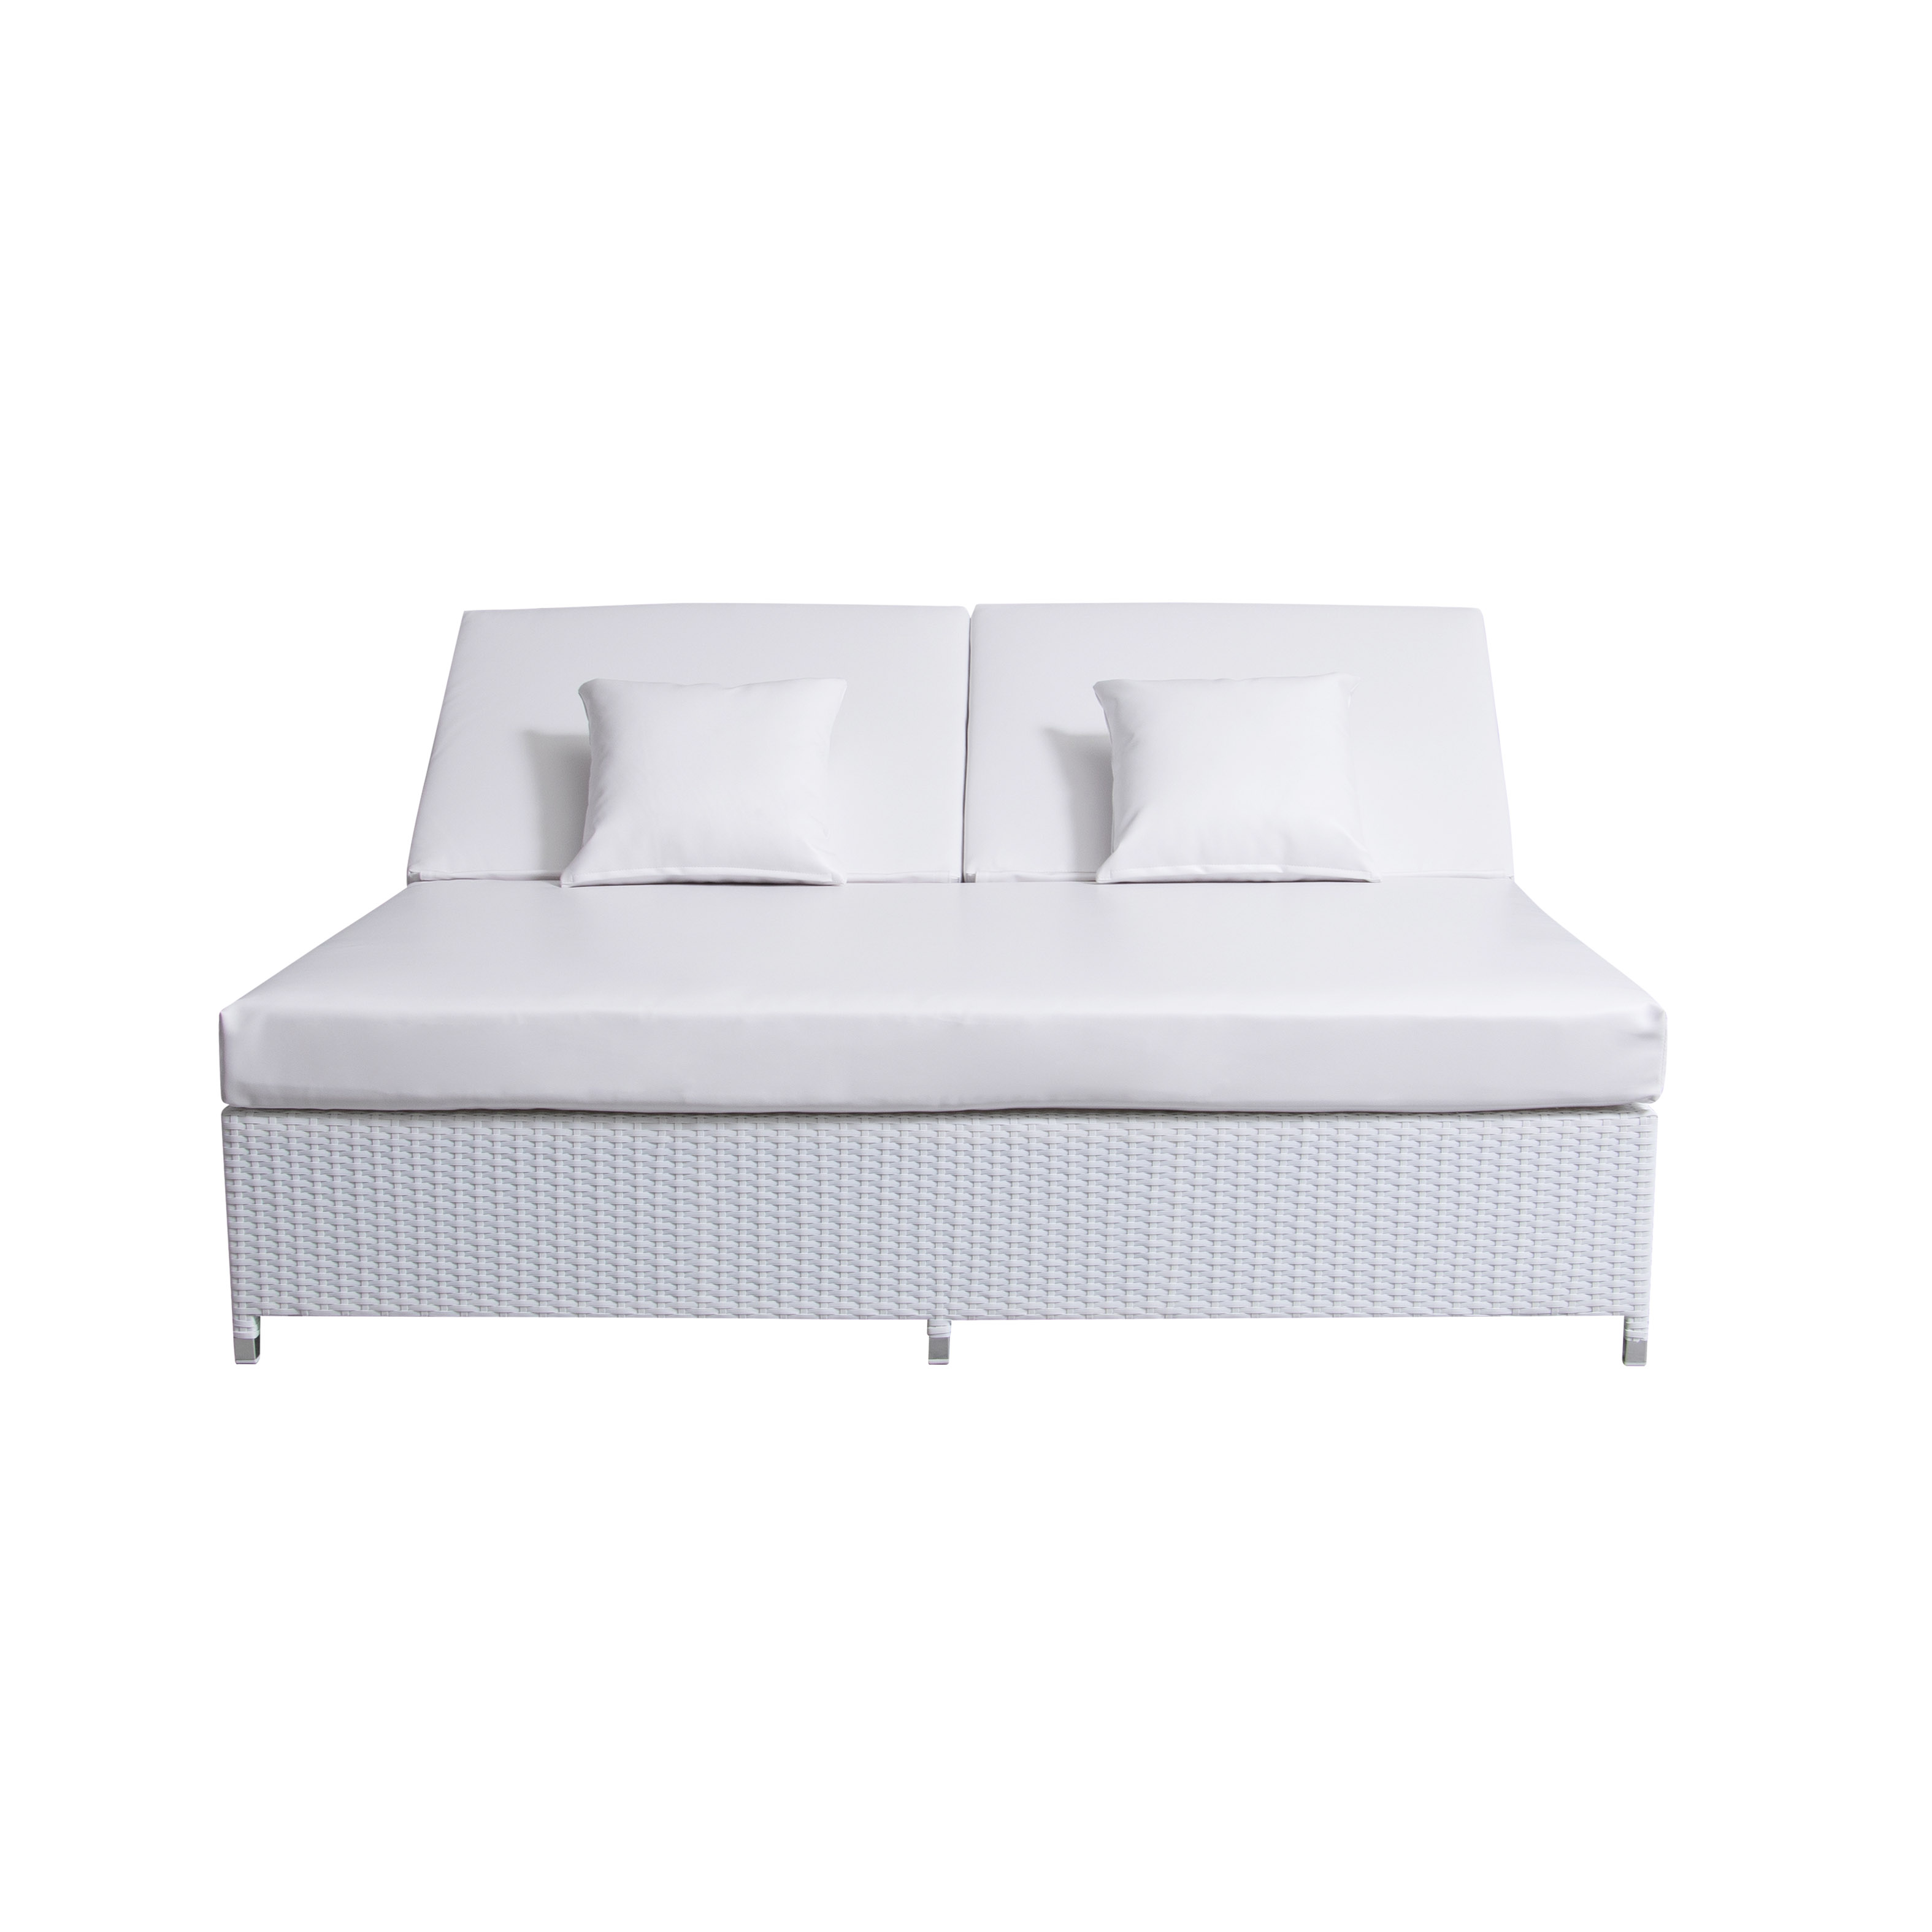 Angela rattan daybed S6